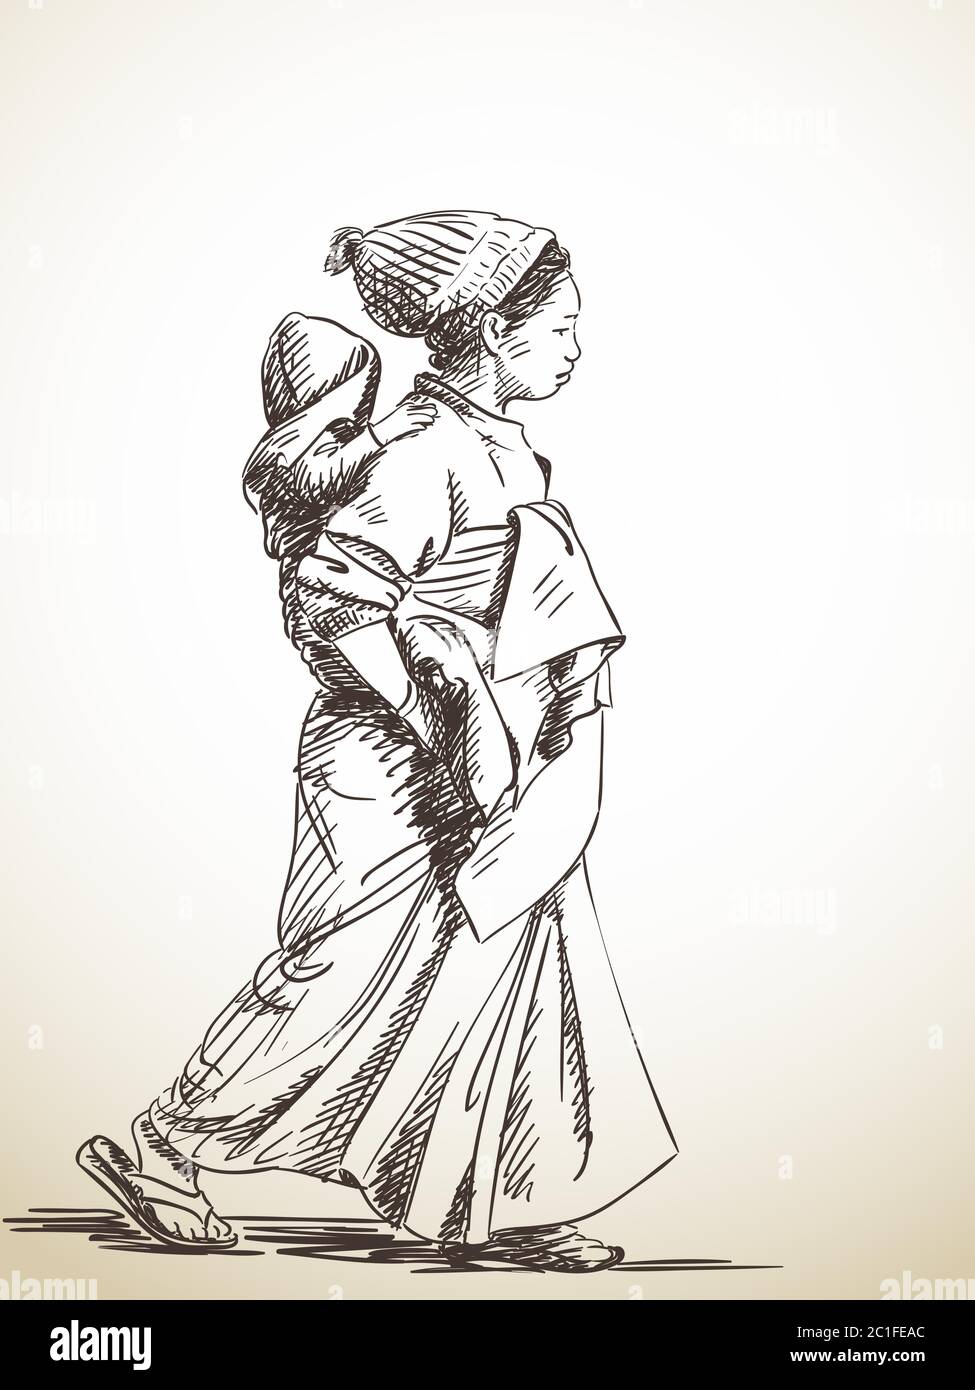 Sketch of woman carries baby on her back, Hand drawn illustration Stock ...